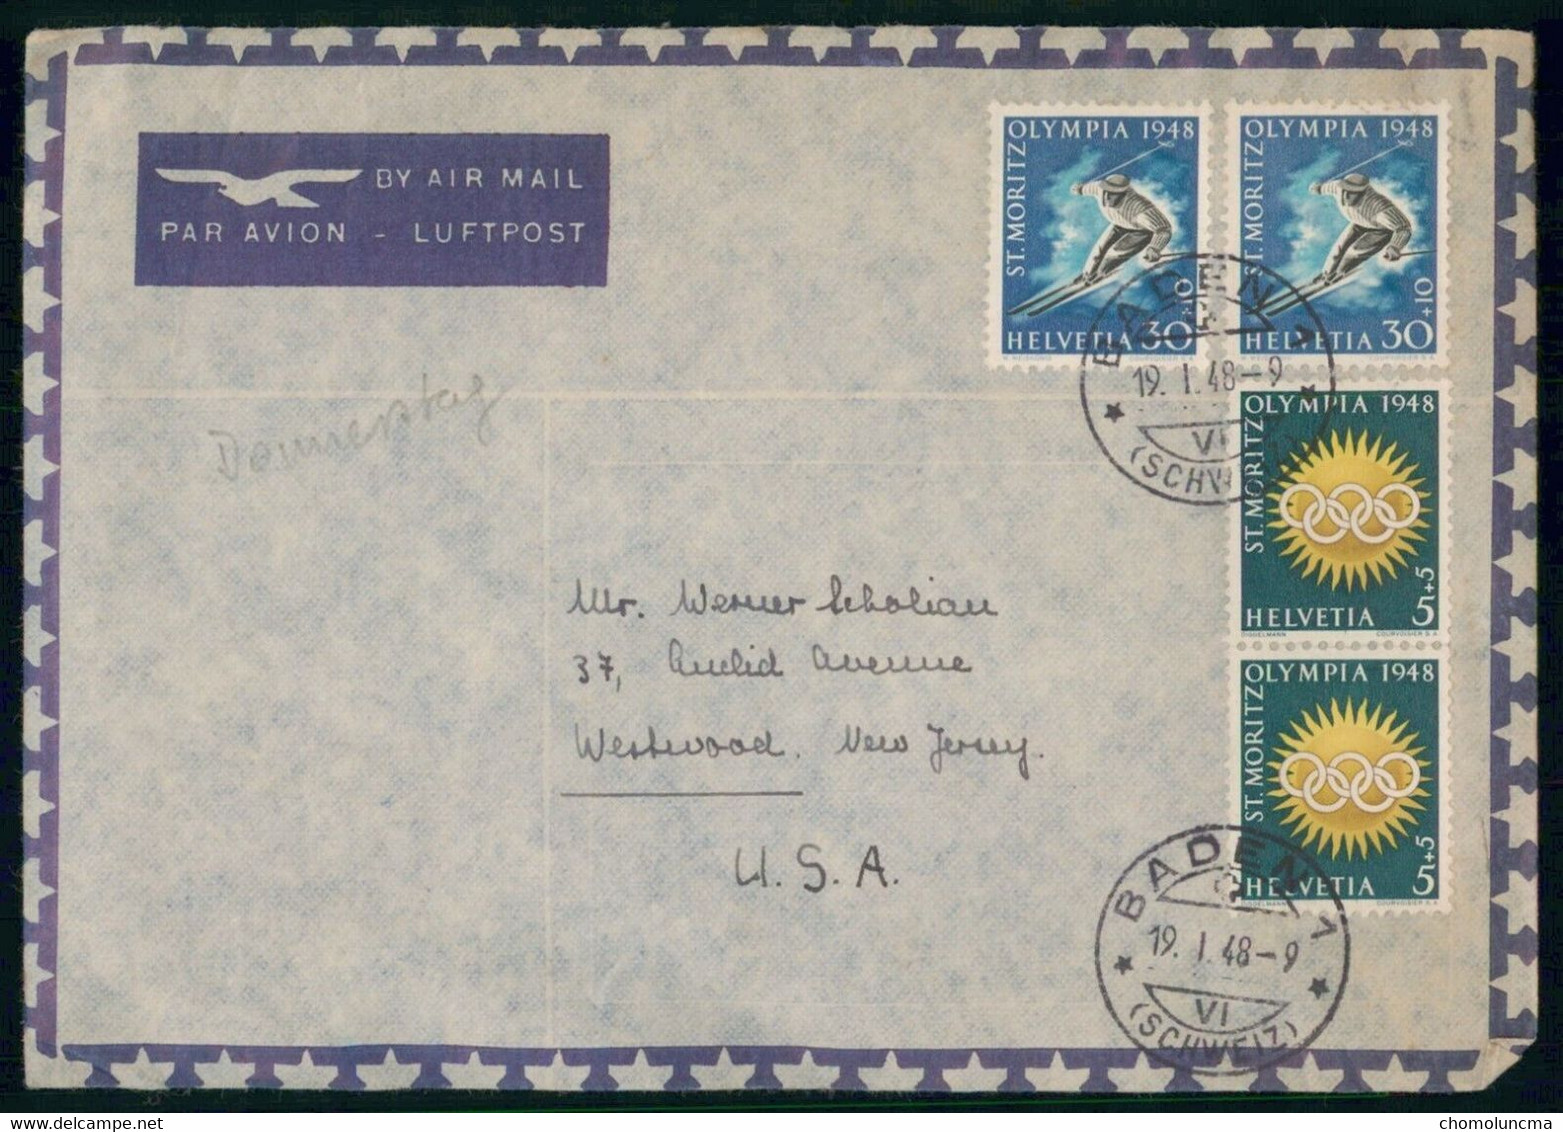 1948 St Moritz Winter Olympic Games Jeux Olympiques D'Hiver Olympische Winterspiele Cover To Westwood USA - Winter 1948: St-Moritz